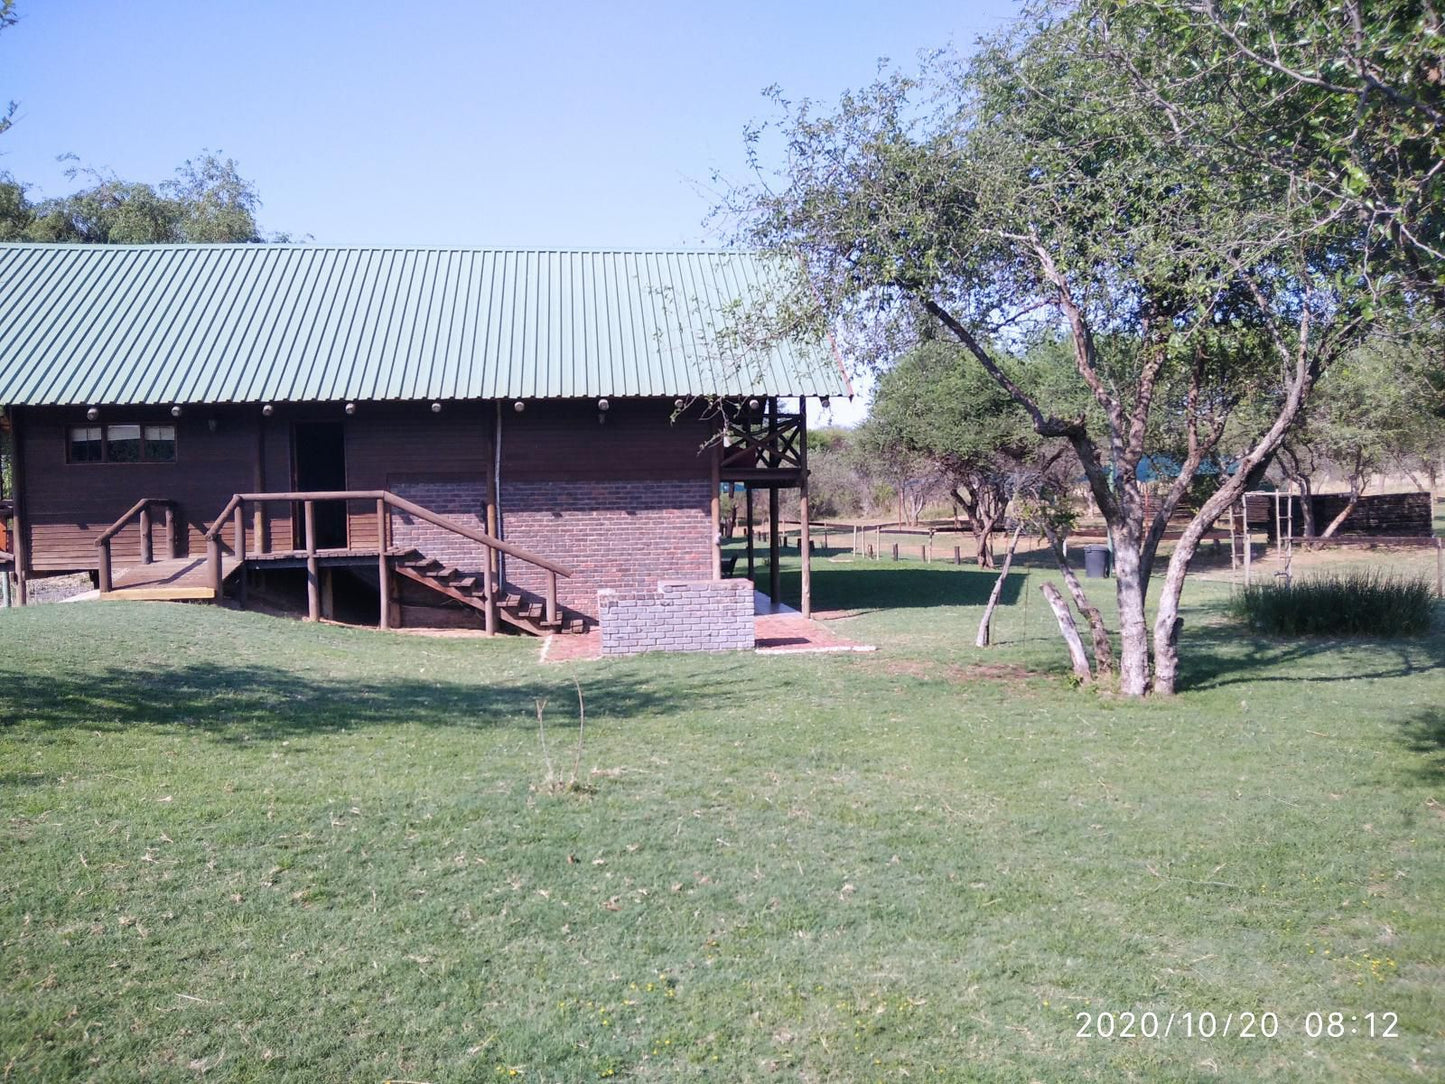 Hanlin Lodge Modimolle Nylstroom Limpopo Province South Africa 